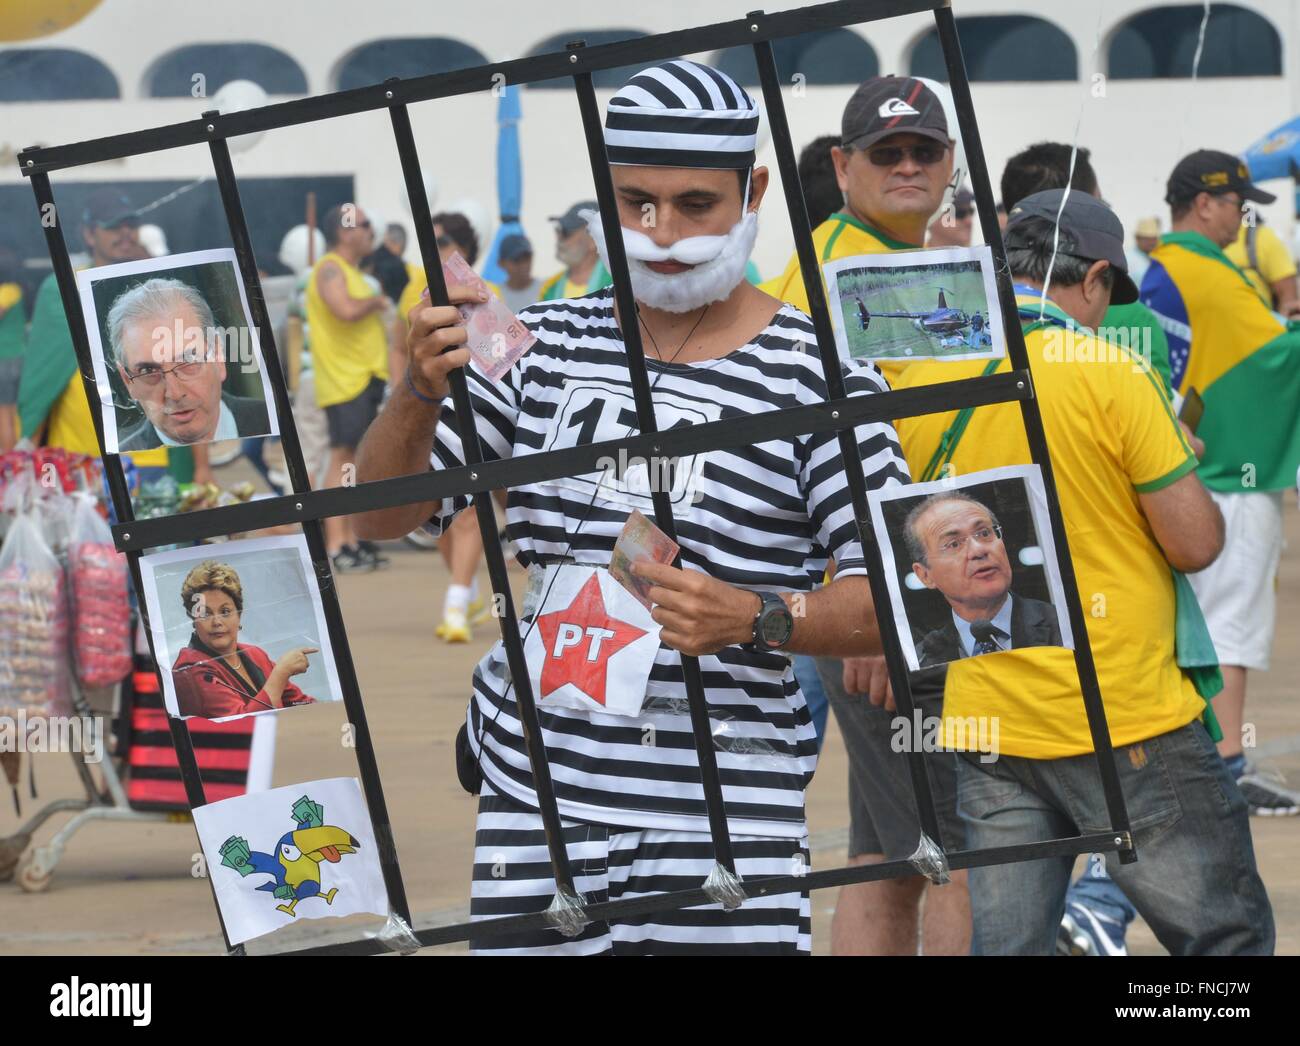 Brasilia, Brazil. 13th Mar, 2016. A protester wearing prisoner stripes joins thousands gathered outside the government district in the capital to demand the resignation of Brazilian President Dilma Rousseff March 13, 2016 in Brasilia, Brazil. Rousseff rejected calls for her resignation amidst a political storm deepened by a massive corruption scandal. Stock Photo